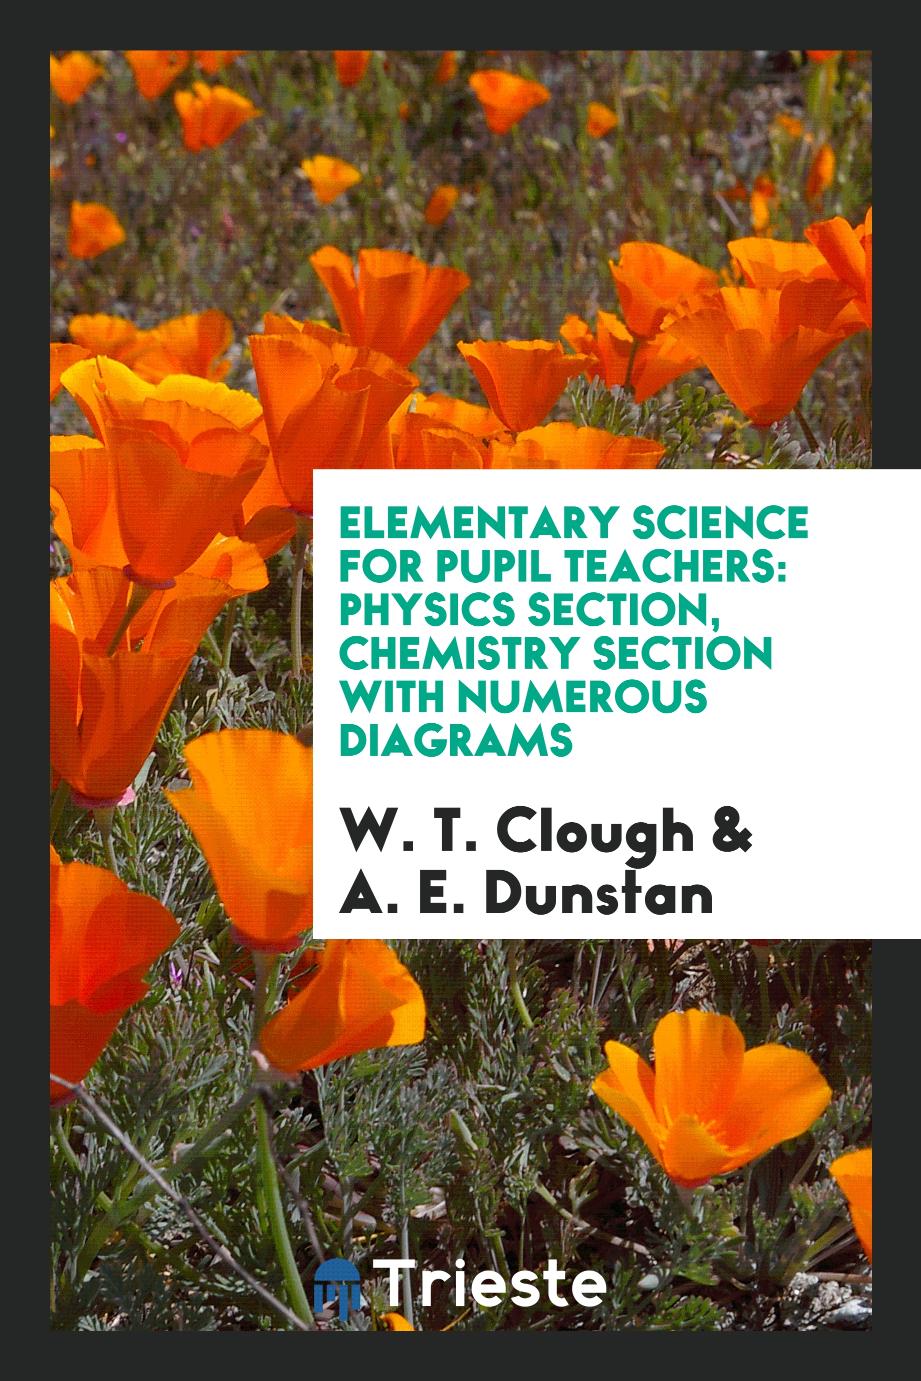 W. T. Clough, A. E. Dunstan - Elementary Science for Pupil Teachers: Physics Section, Chemistry Section with Numerous Diagrams